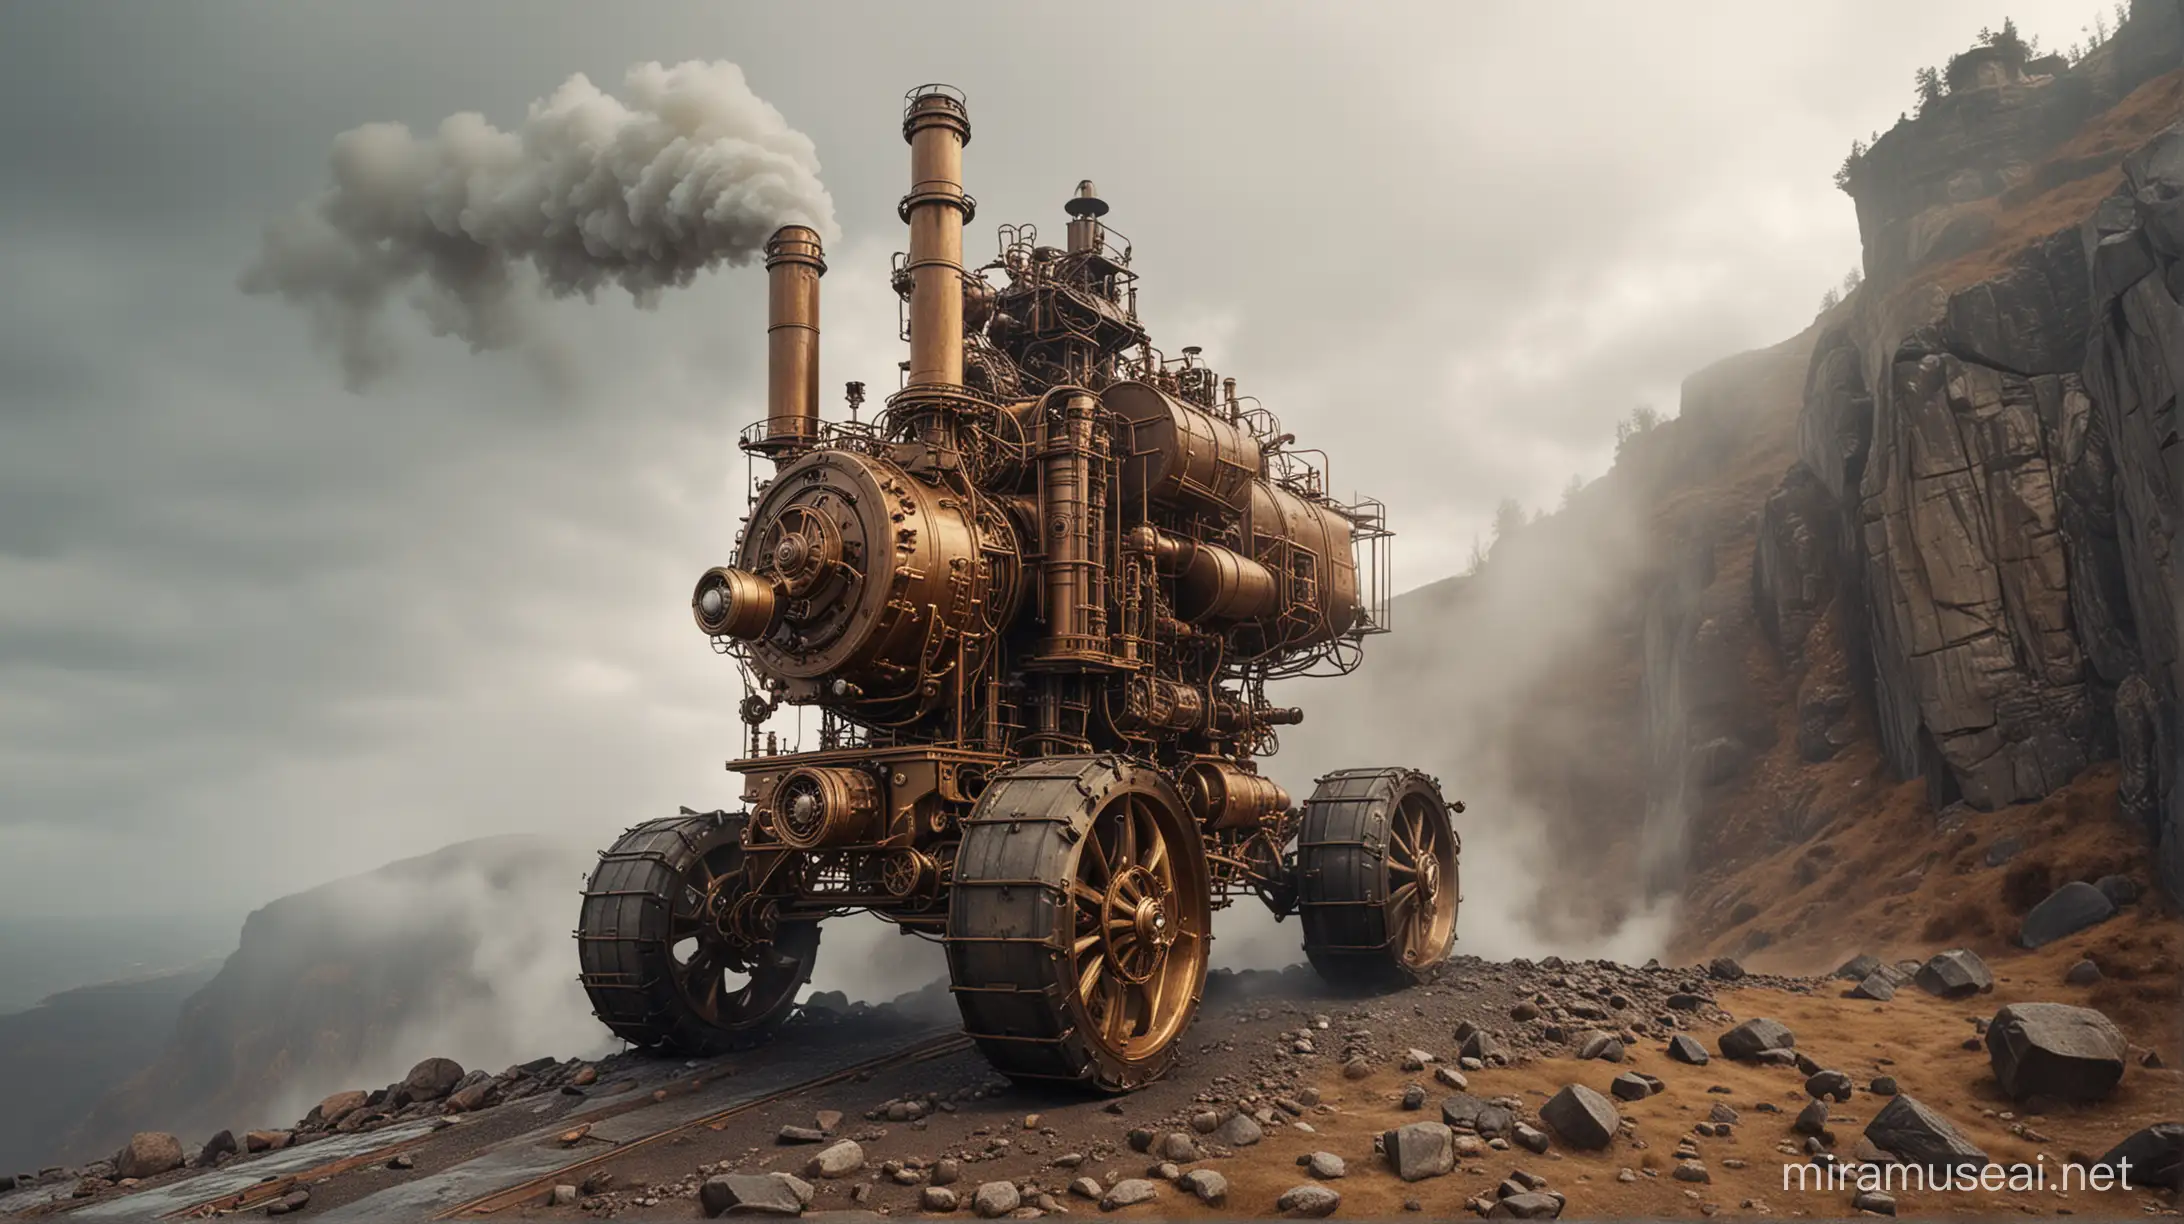 special big steampunk machine climbs a steep rocky hill, machine is made of gold and copper, large exhaust pipes, steam,  smoke, cloudy and rainy